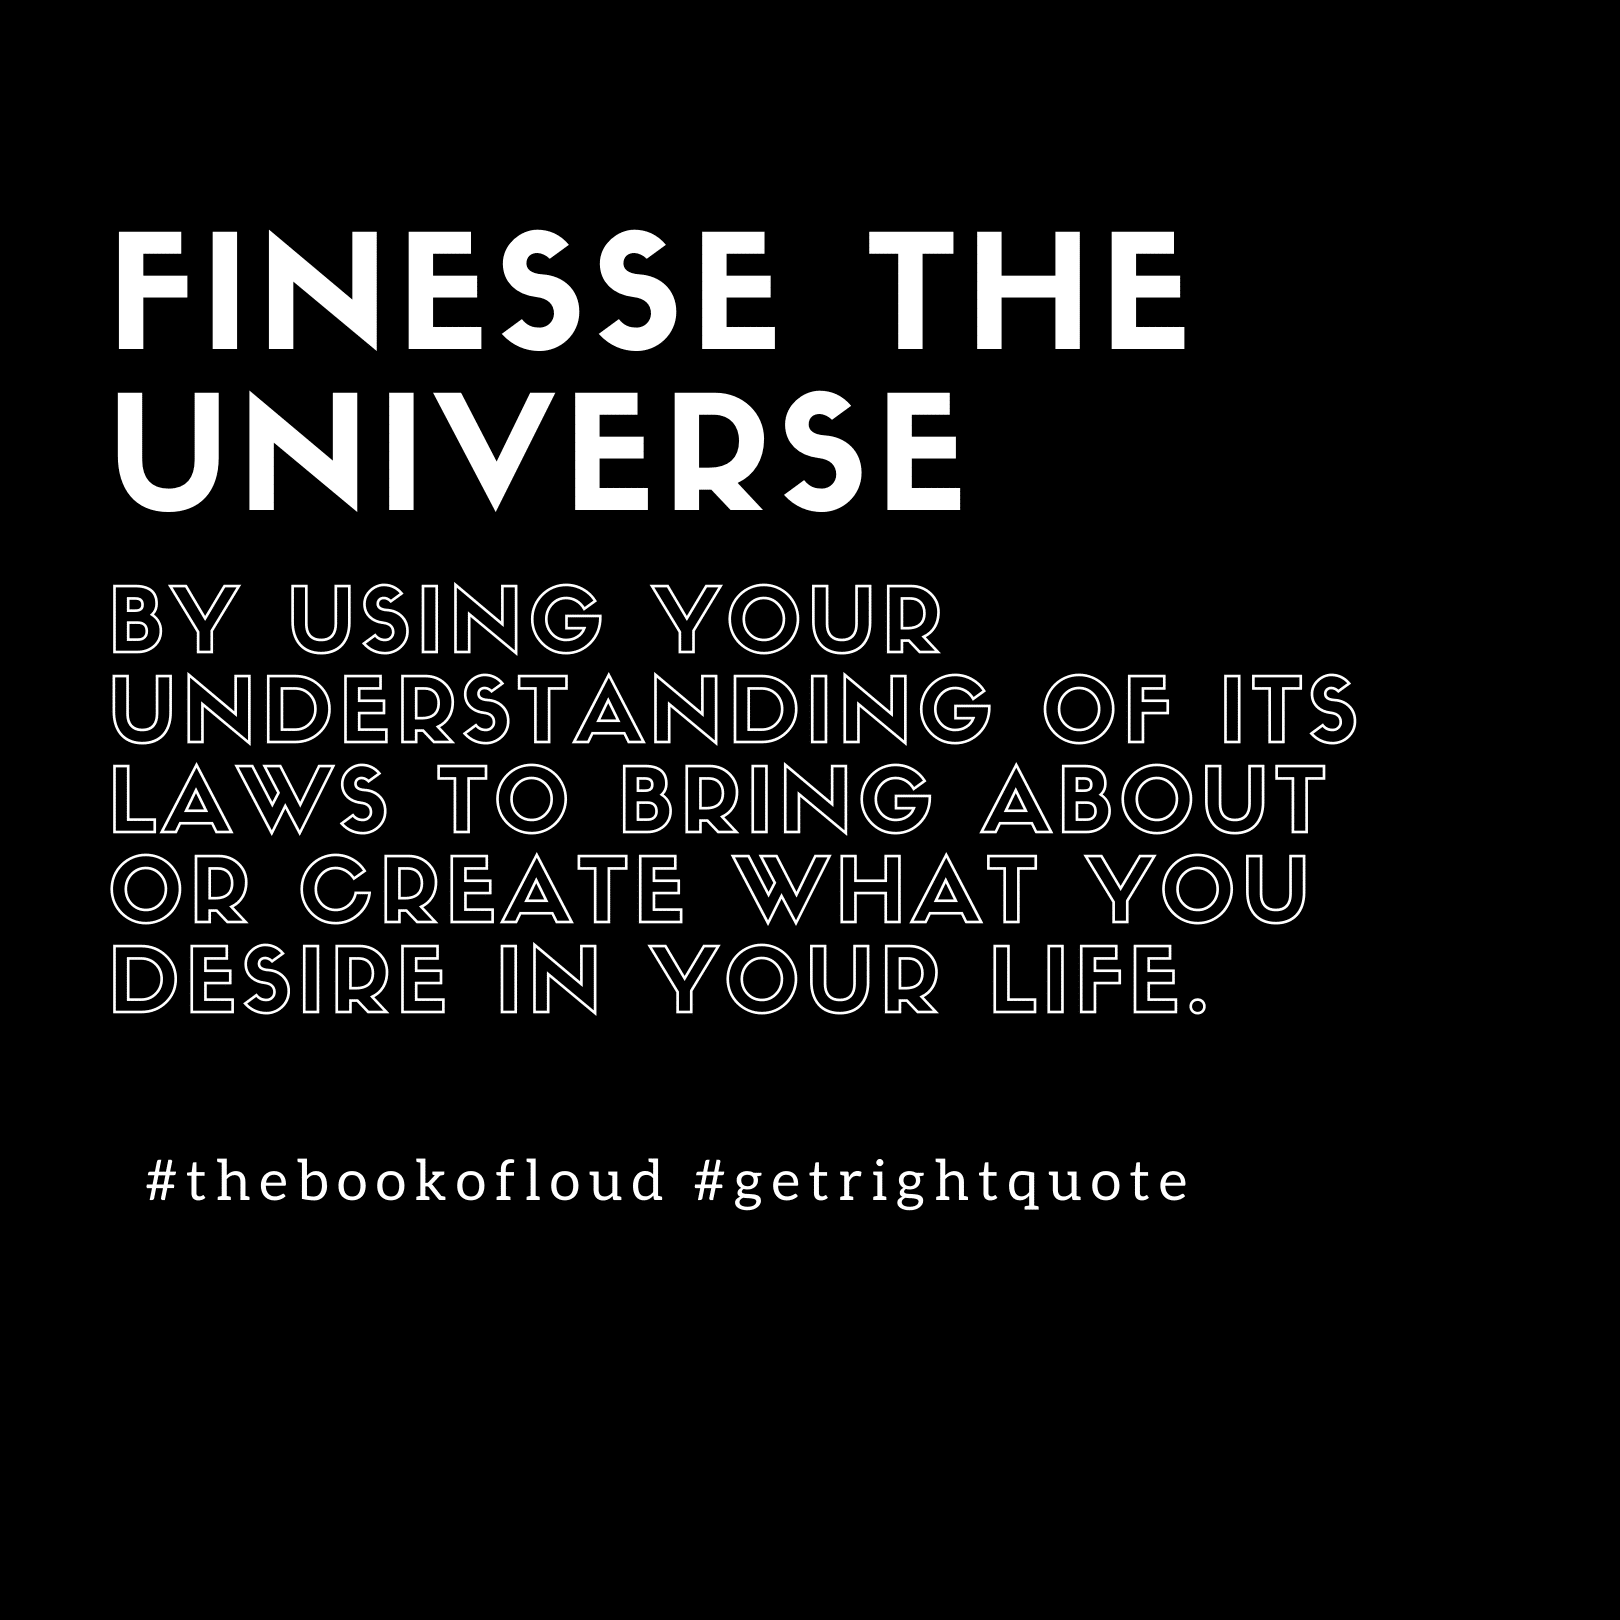 finesse the universe